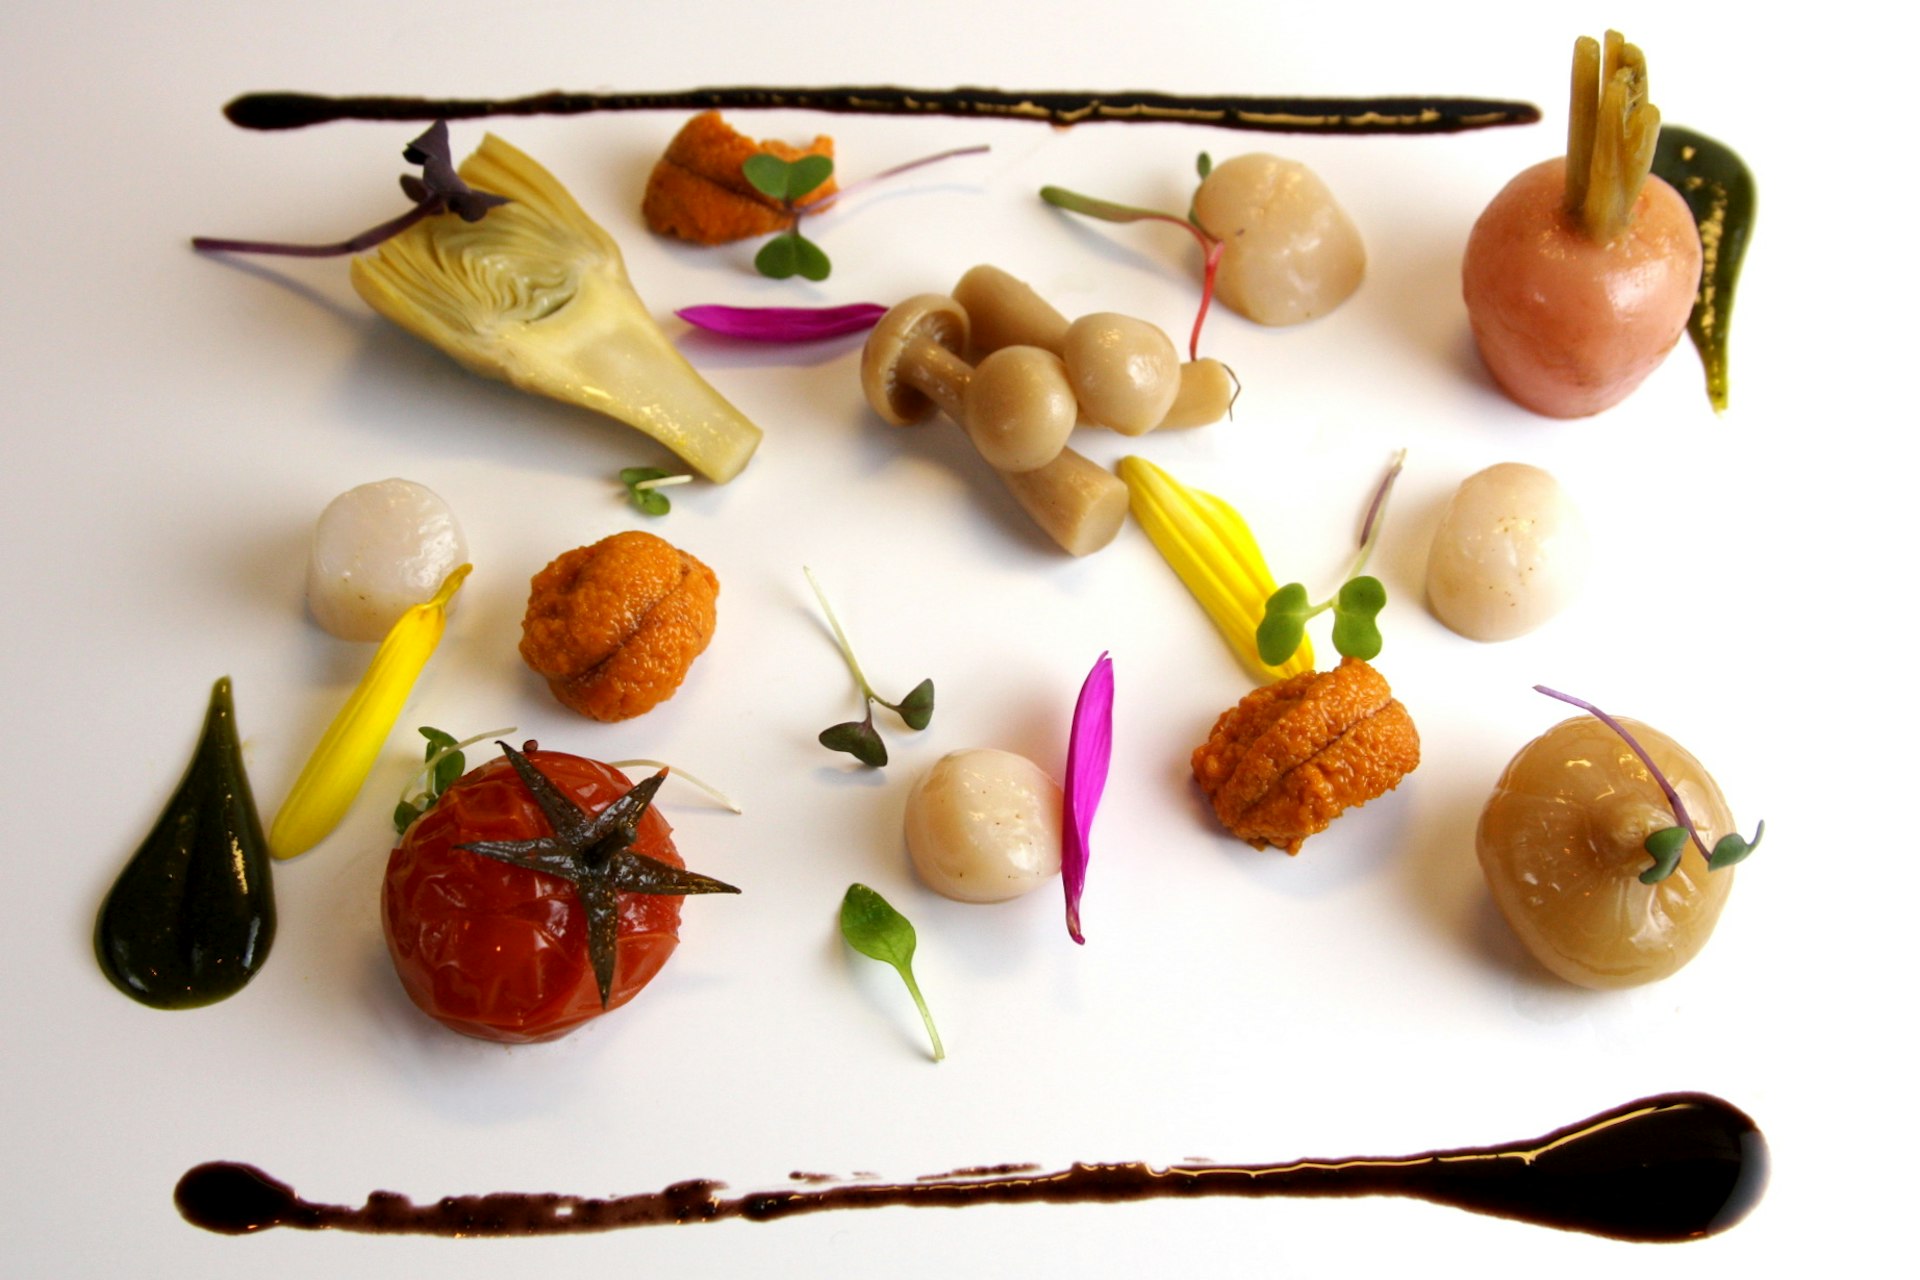 Food as art: a plate of bay sea scallop, sea urchin, preserved vegetables, and black olive oil from the Tasting Counter.